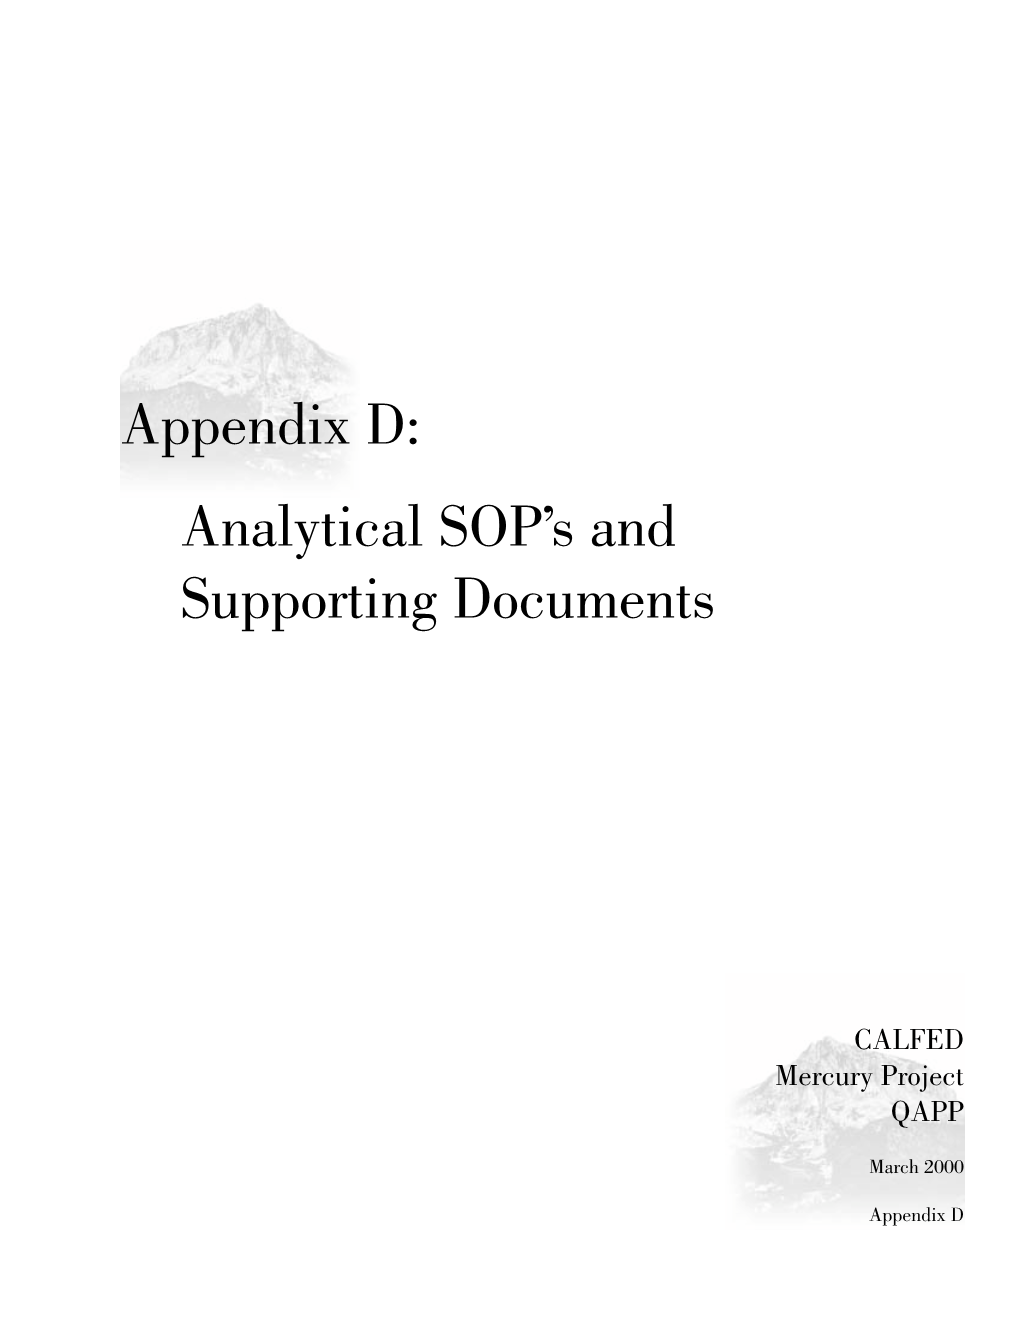 Appendix D: Analytical SOP's and Supporting Documents